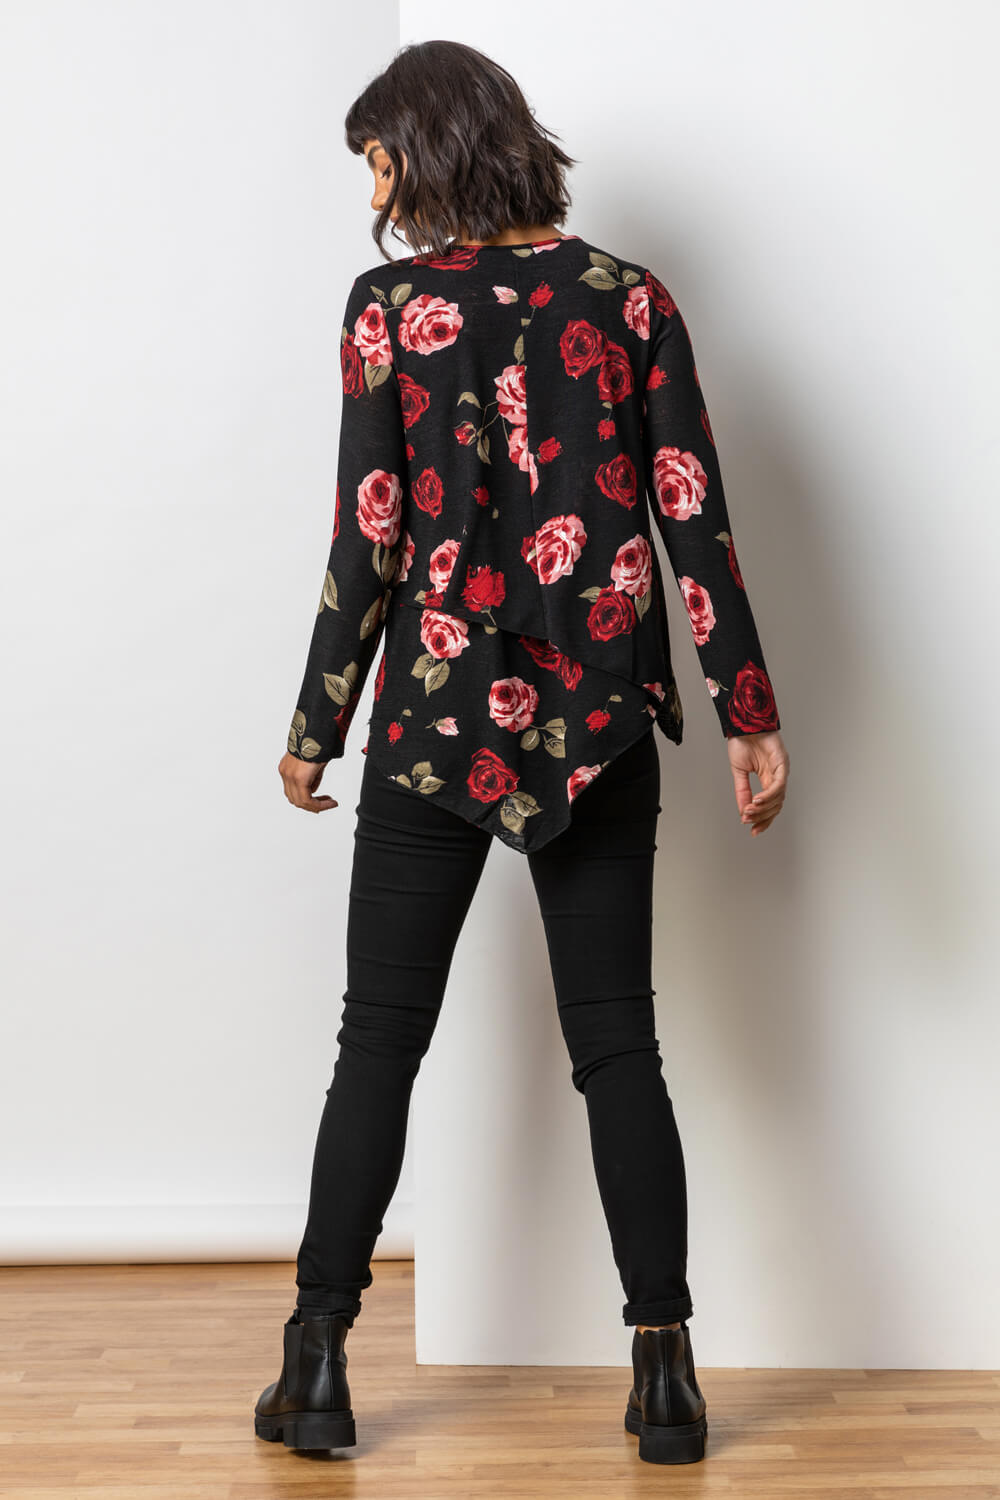 PINK Floral Rose Print Layered Asymmetric Top , Image 2 of 5